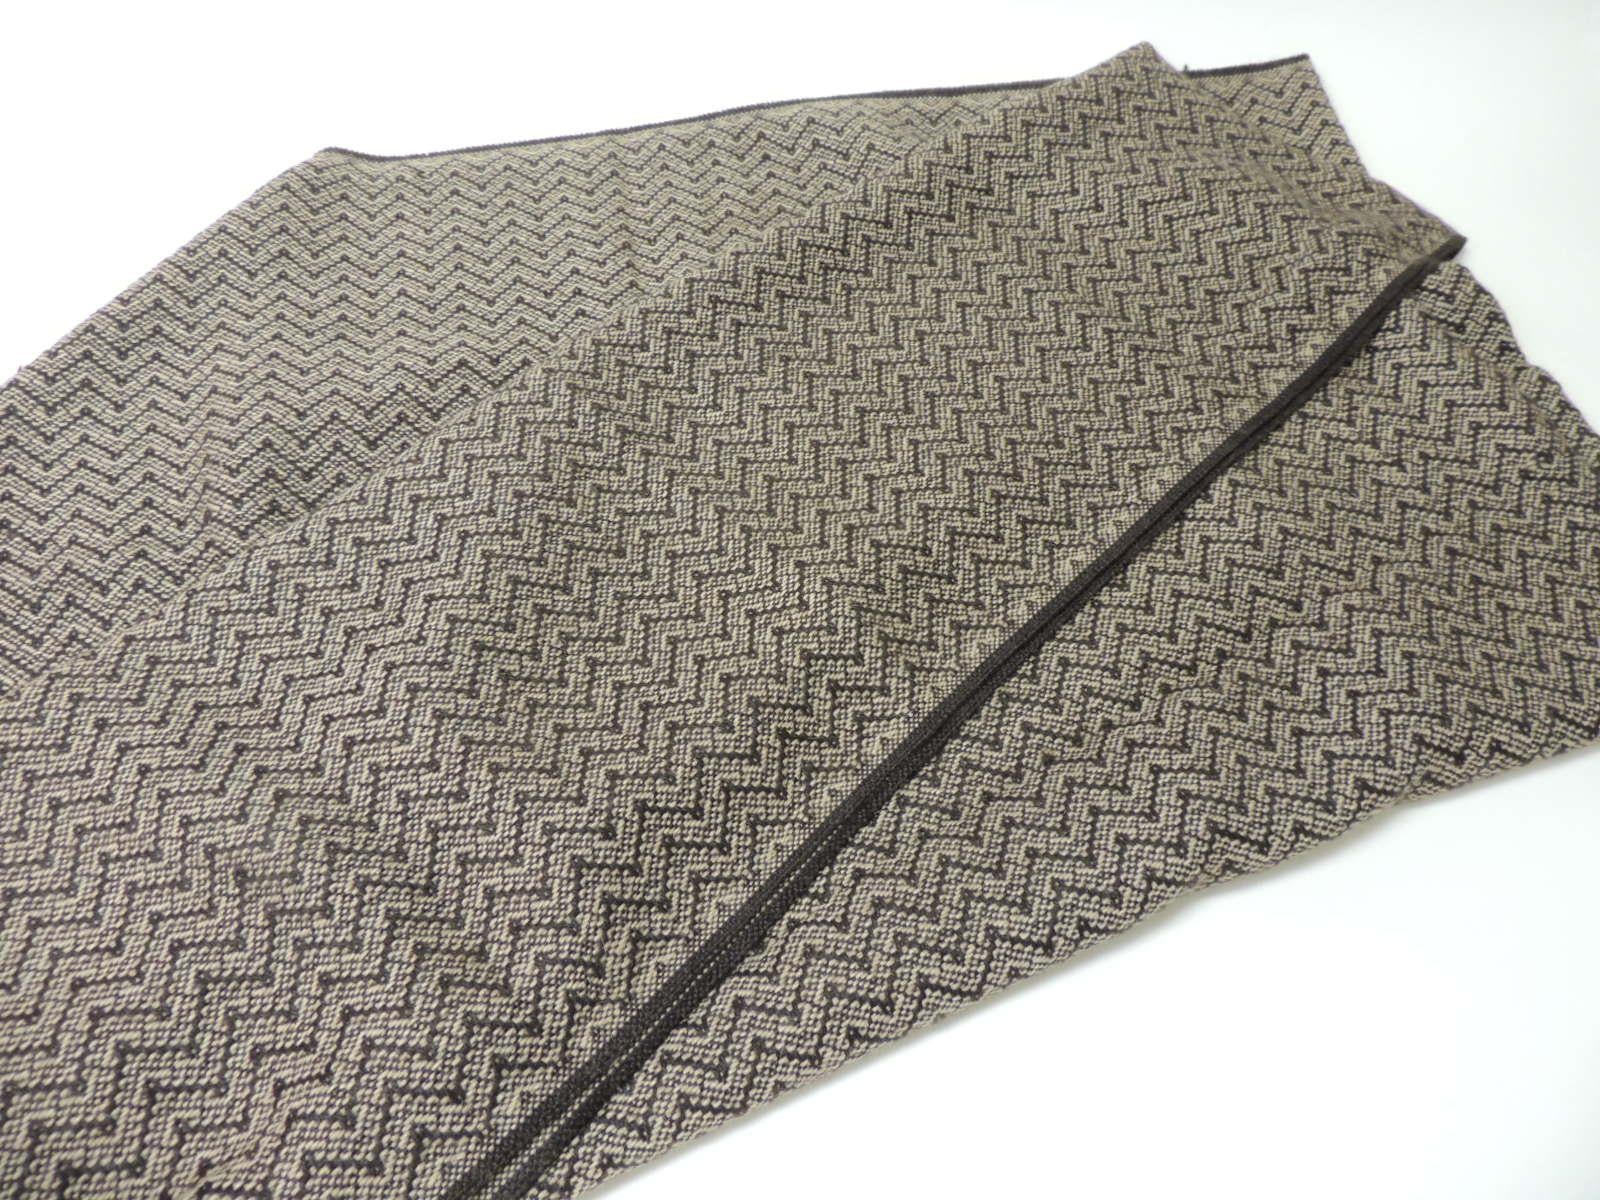 Hand-Crafted Brown and Beige Chevron Pattern Alpaca Throw with Fringes